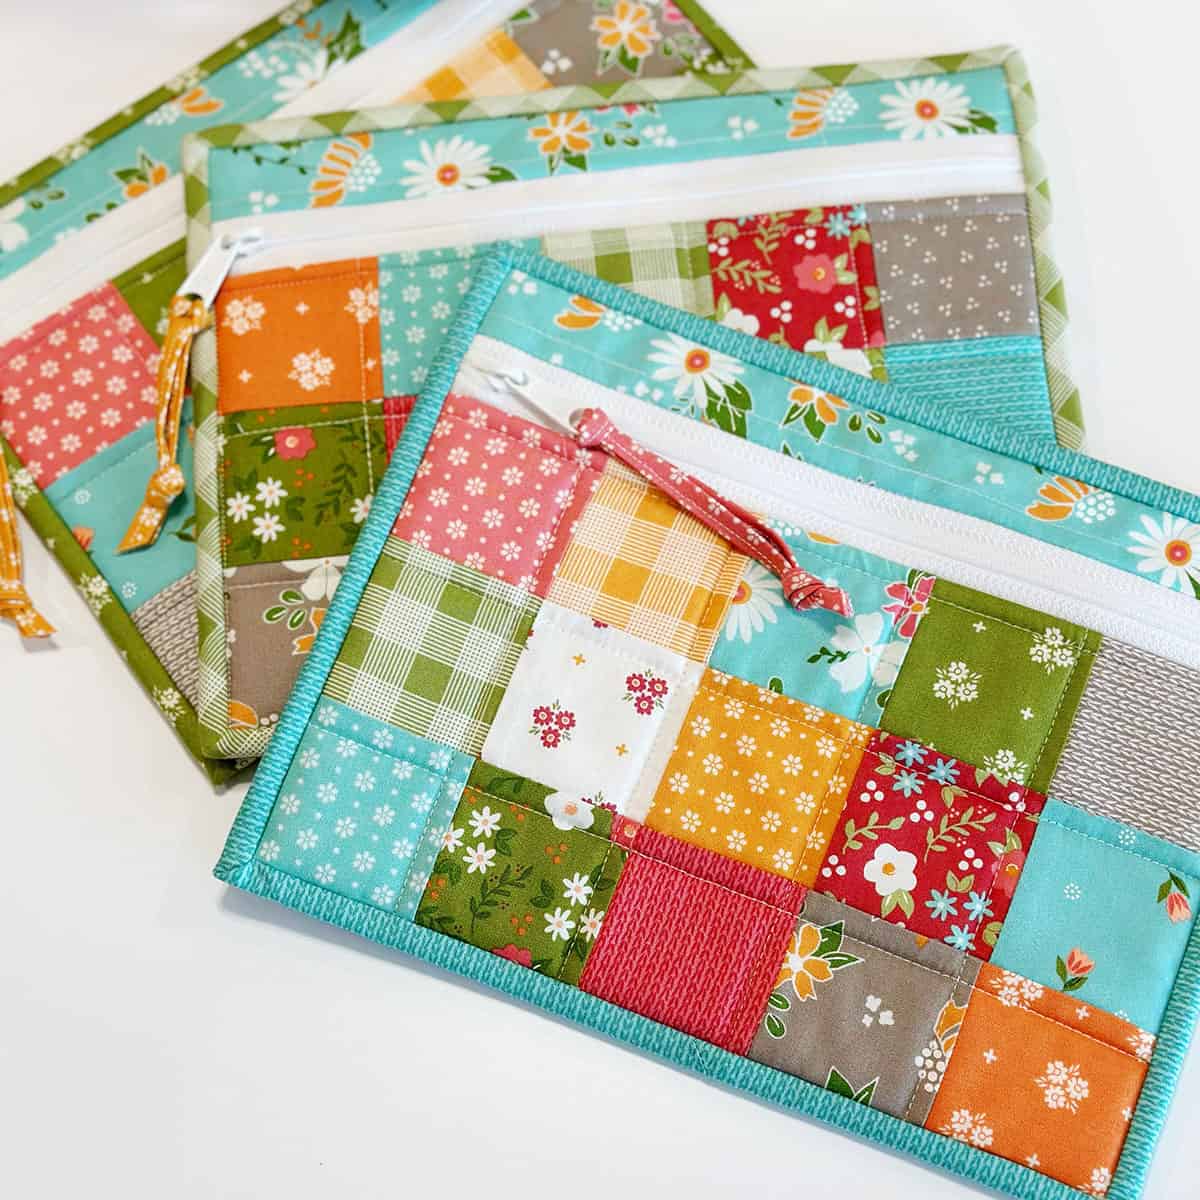 Ultimate Guide to Gift Ideas for Quilters - Sew What, Alicia?